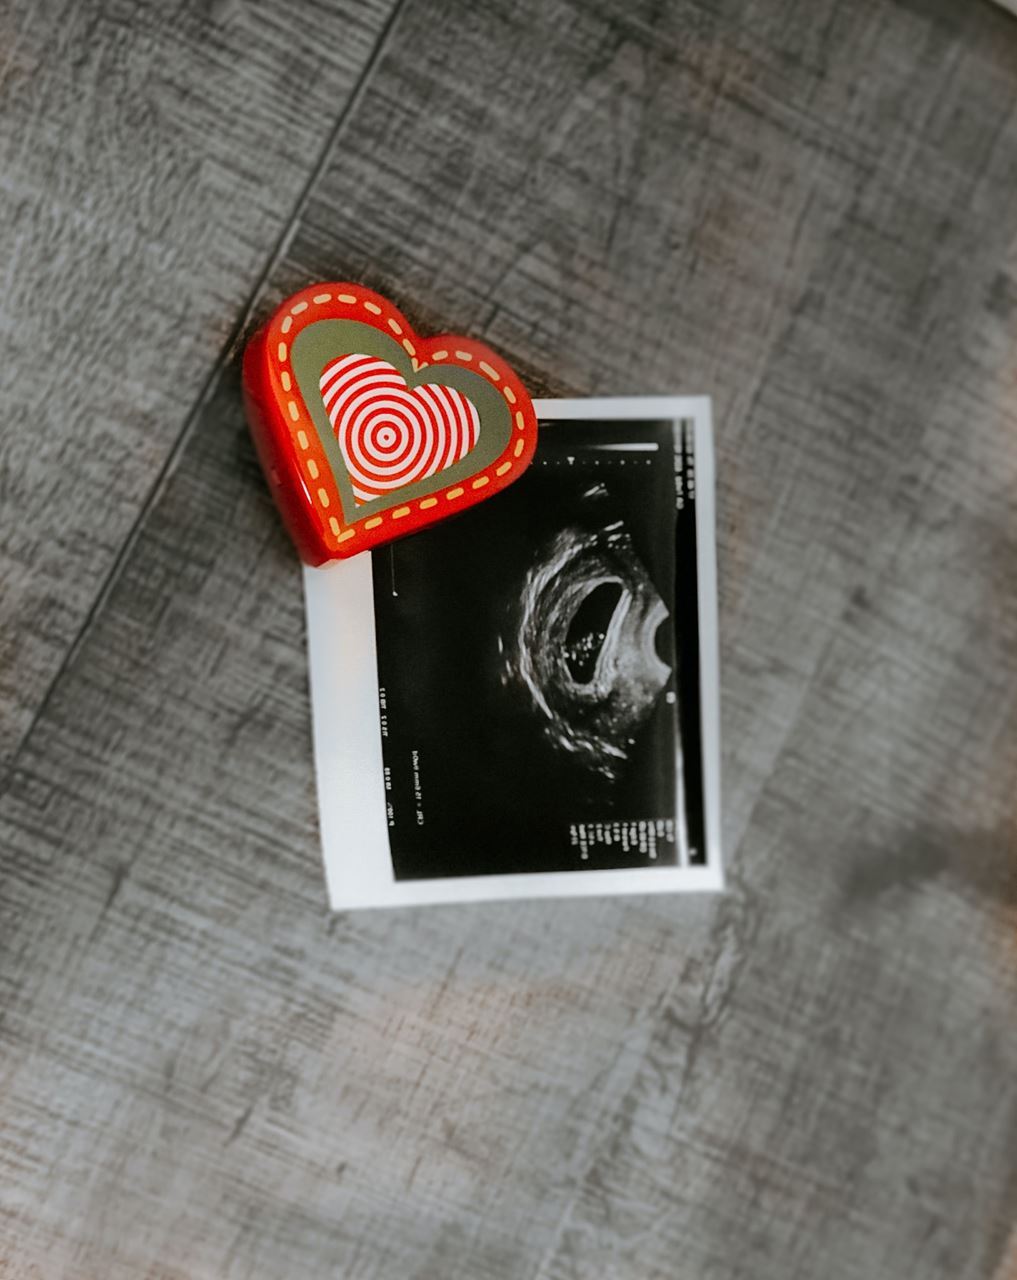 ultrasound photo of baby being pinned to a board with a heart shaped pin. Photo by Viviana Rishe on Unsplash.